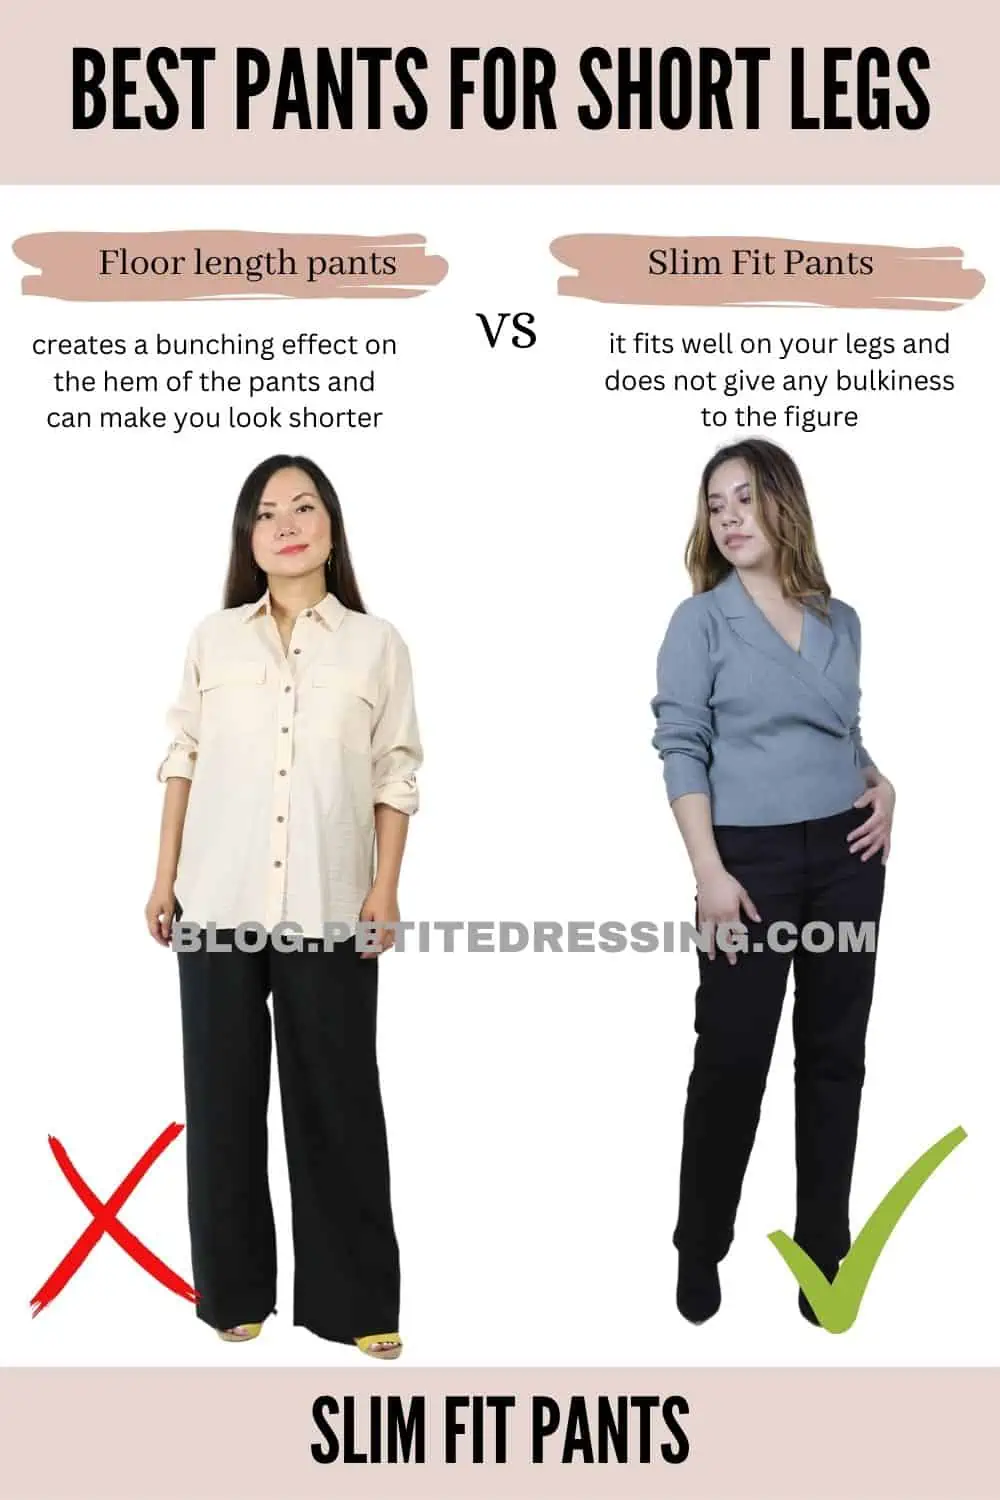 The Complete Tops Guide for Women with Long Torso Short Legs